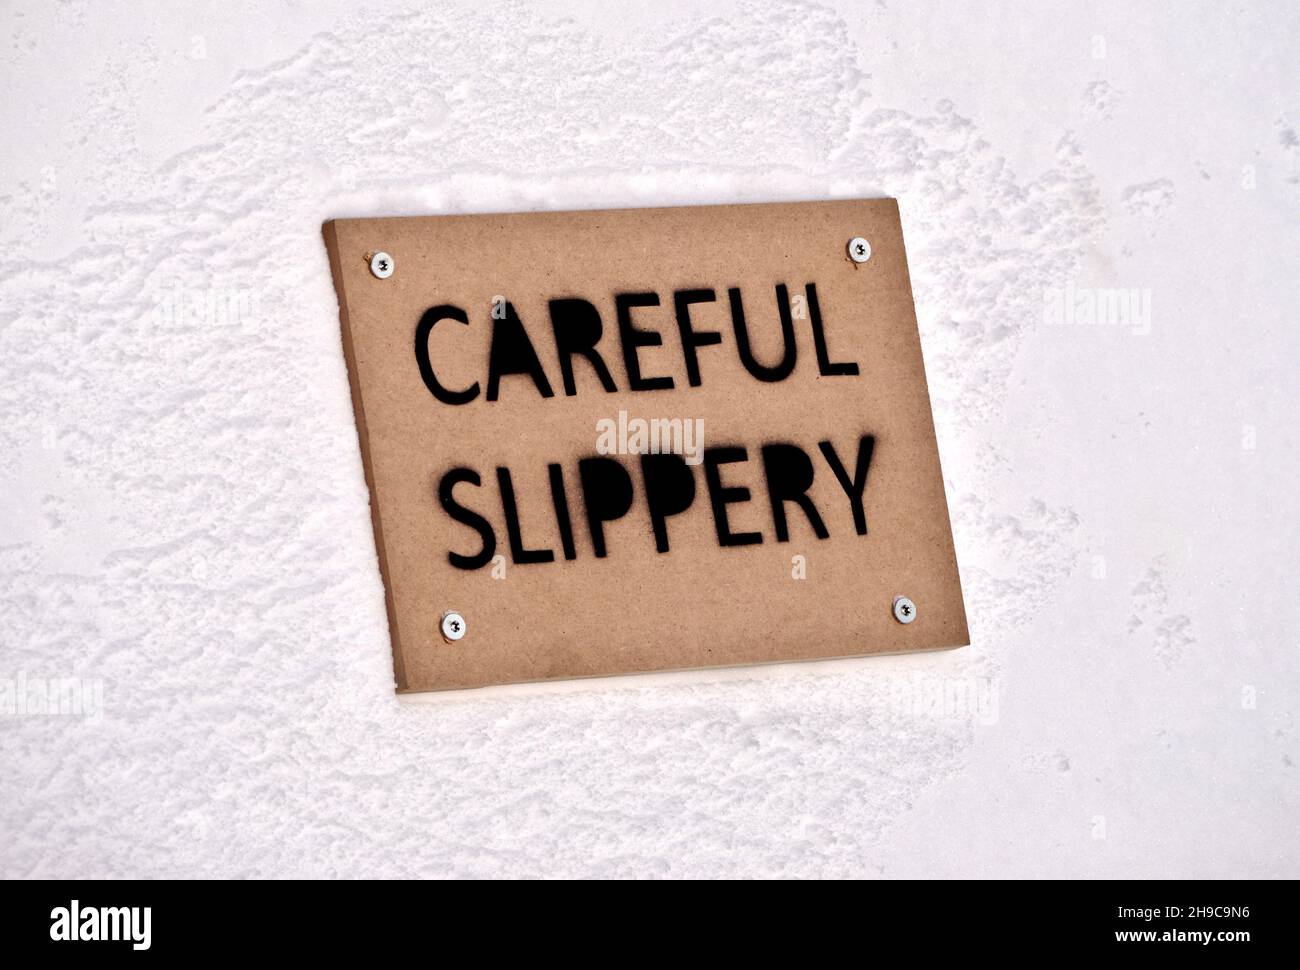 Careful slipper sign pinned to a snow wall Stock Photo